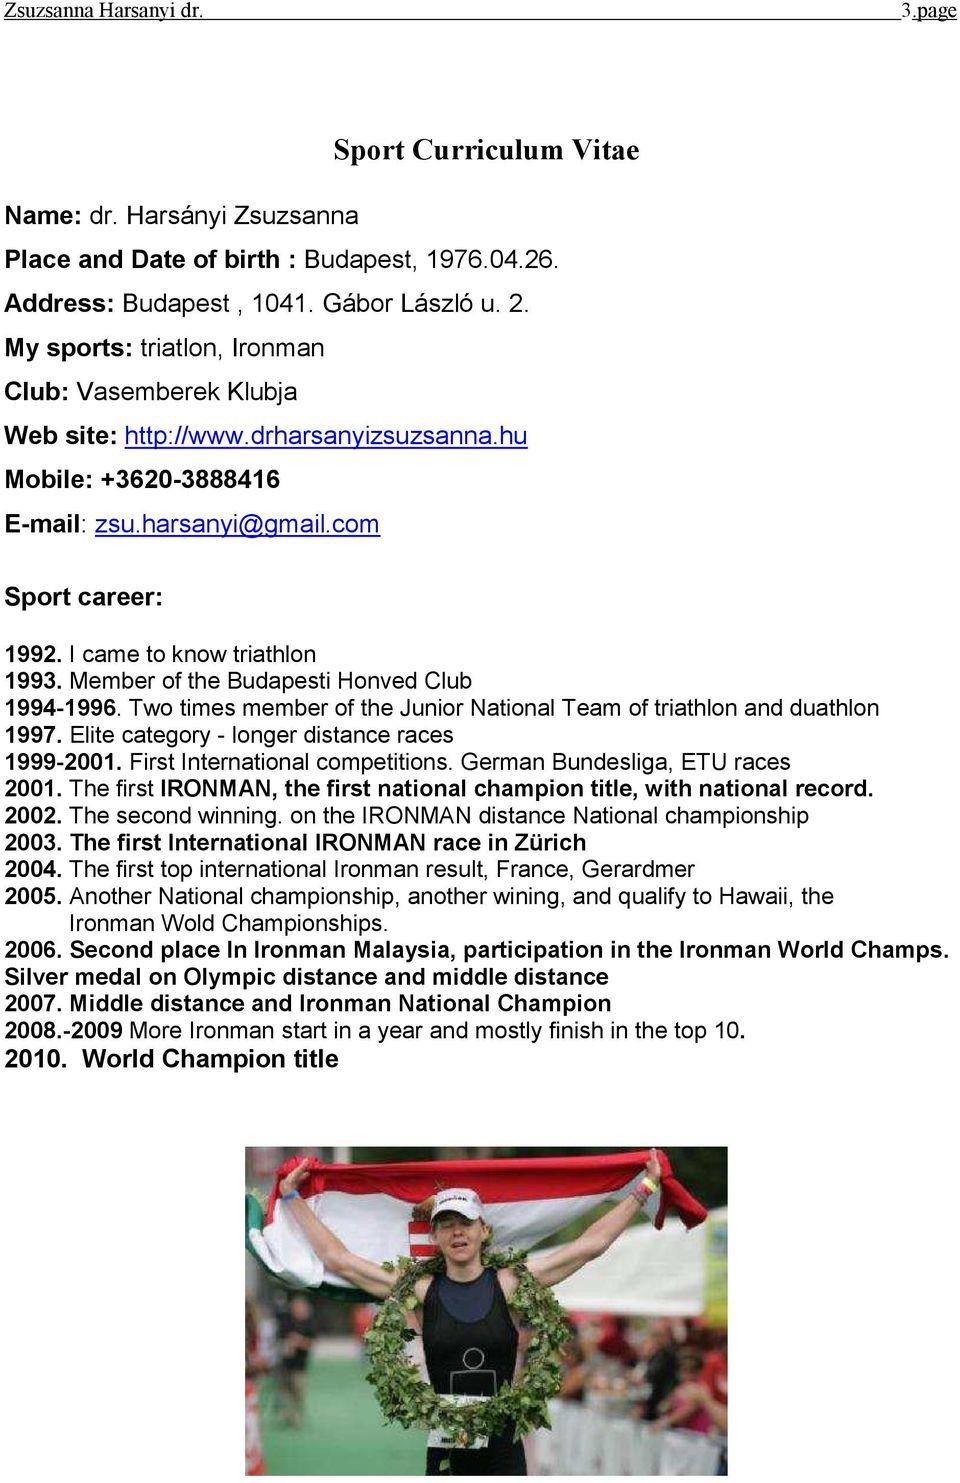 Member of the Budapesti Honved Club 1994-1996. Two times member of the Junior National Team of triathlon and duathlon 1997. Elite category - longer distance races 1999-2001.